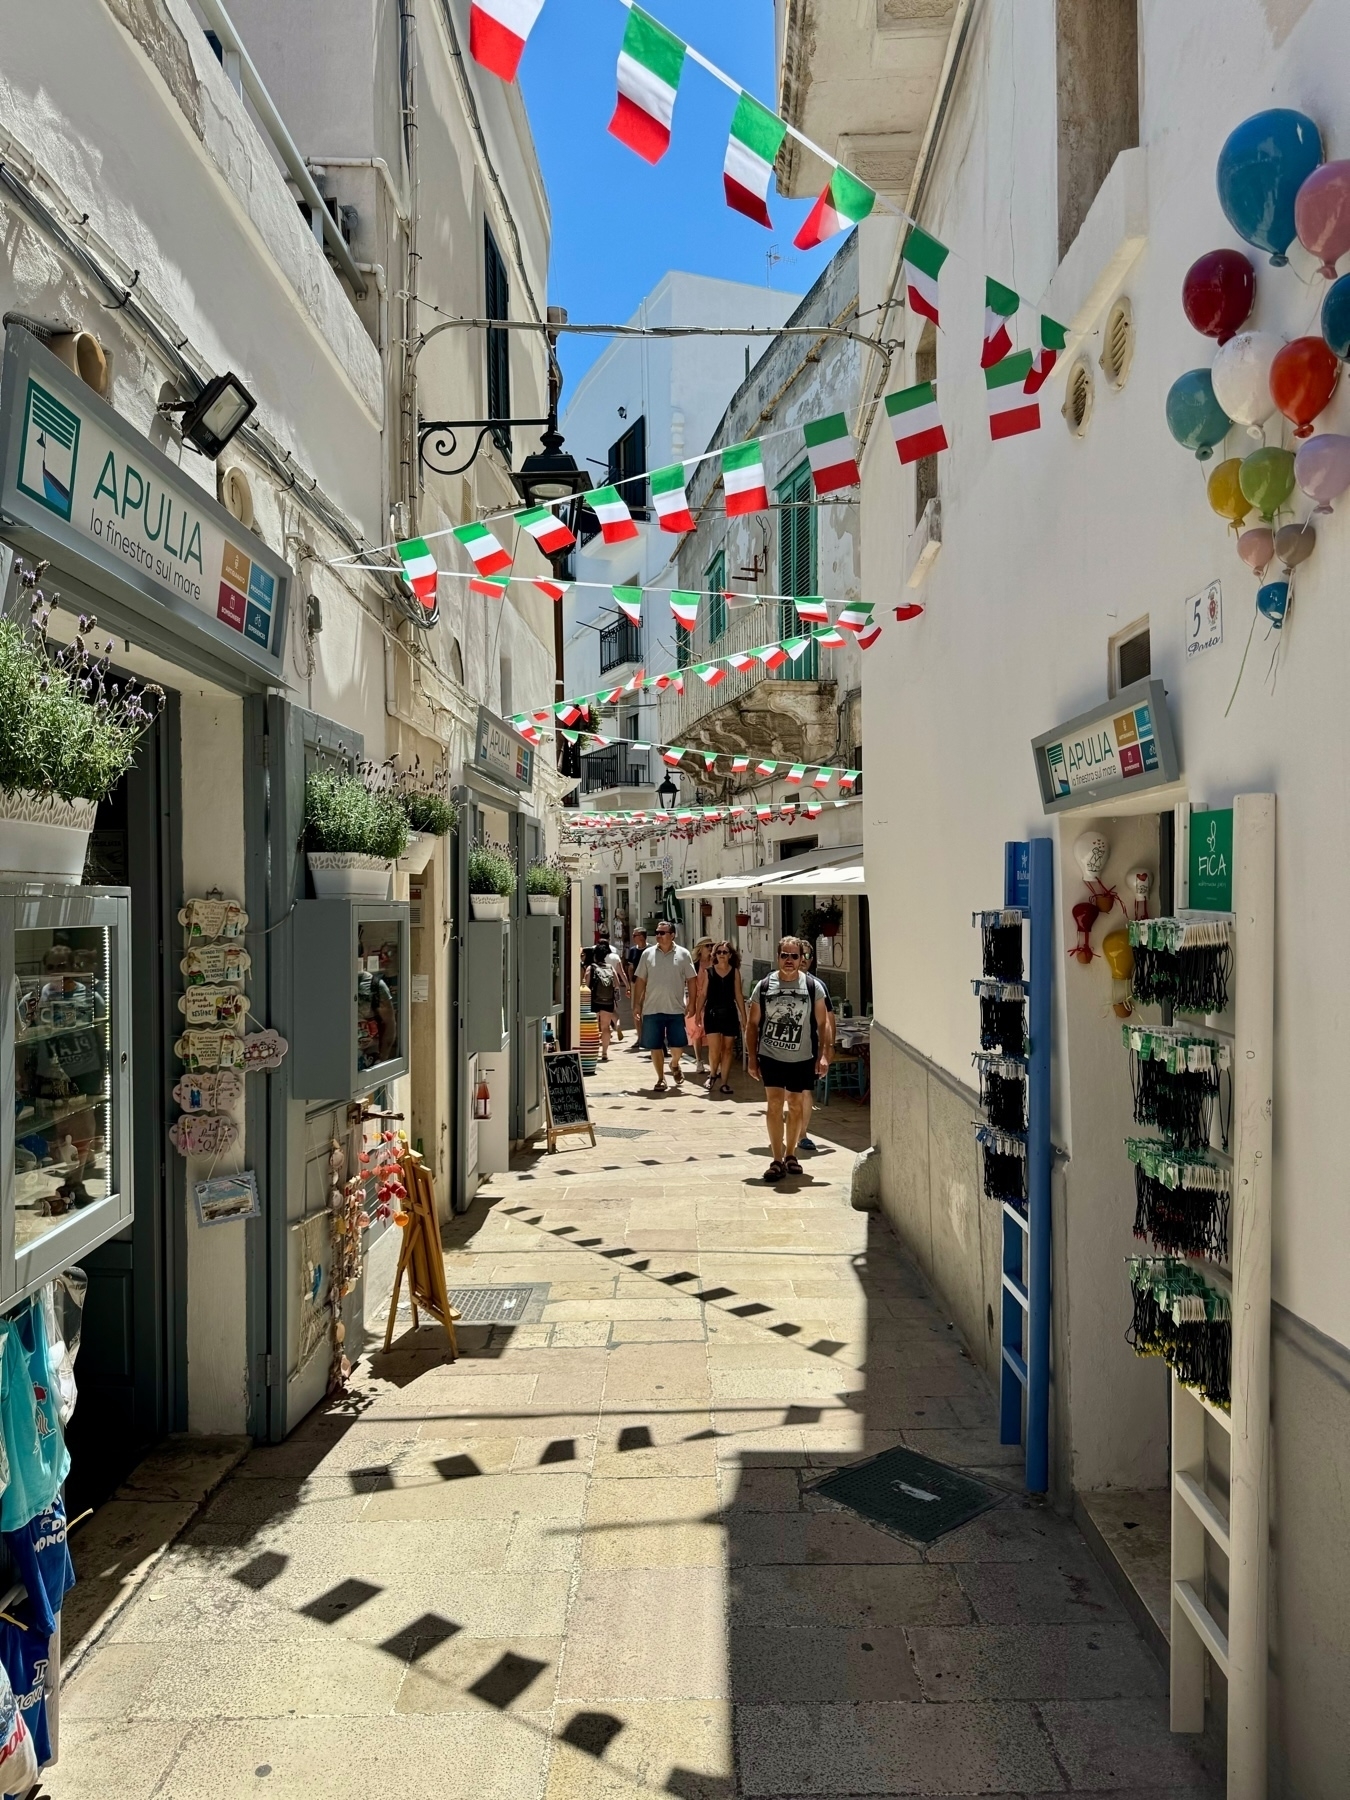 Narrow pedestrian street adorned with Italian flag bunting. Shops on both sides display various items, including signs for “APULIA.” People stroll along the cobblestone path under a clear blue sky.